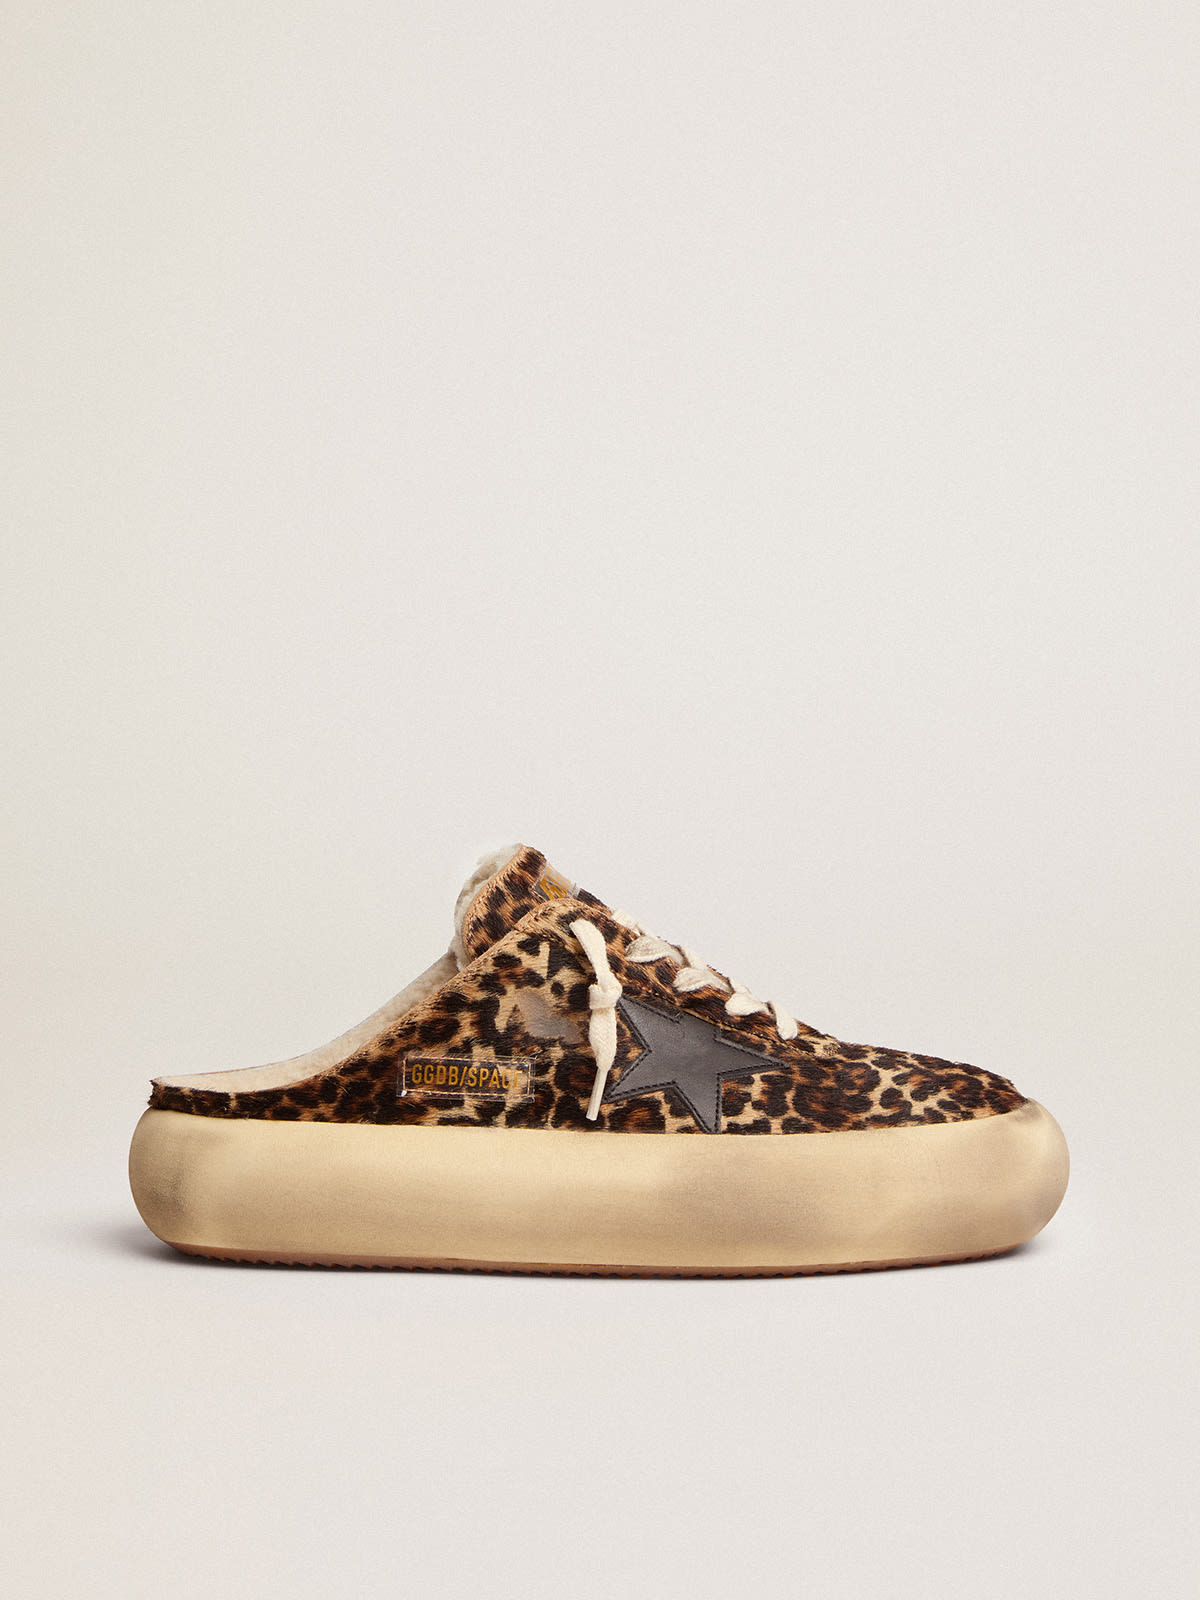 Space-Star Sabot shoes in animal-print pony skin with shearling lining